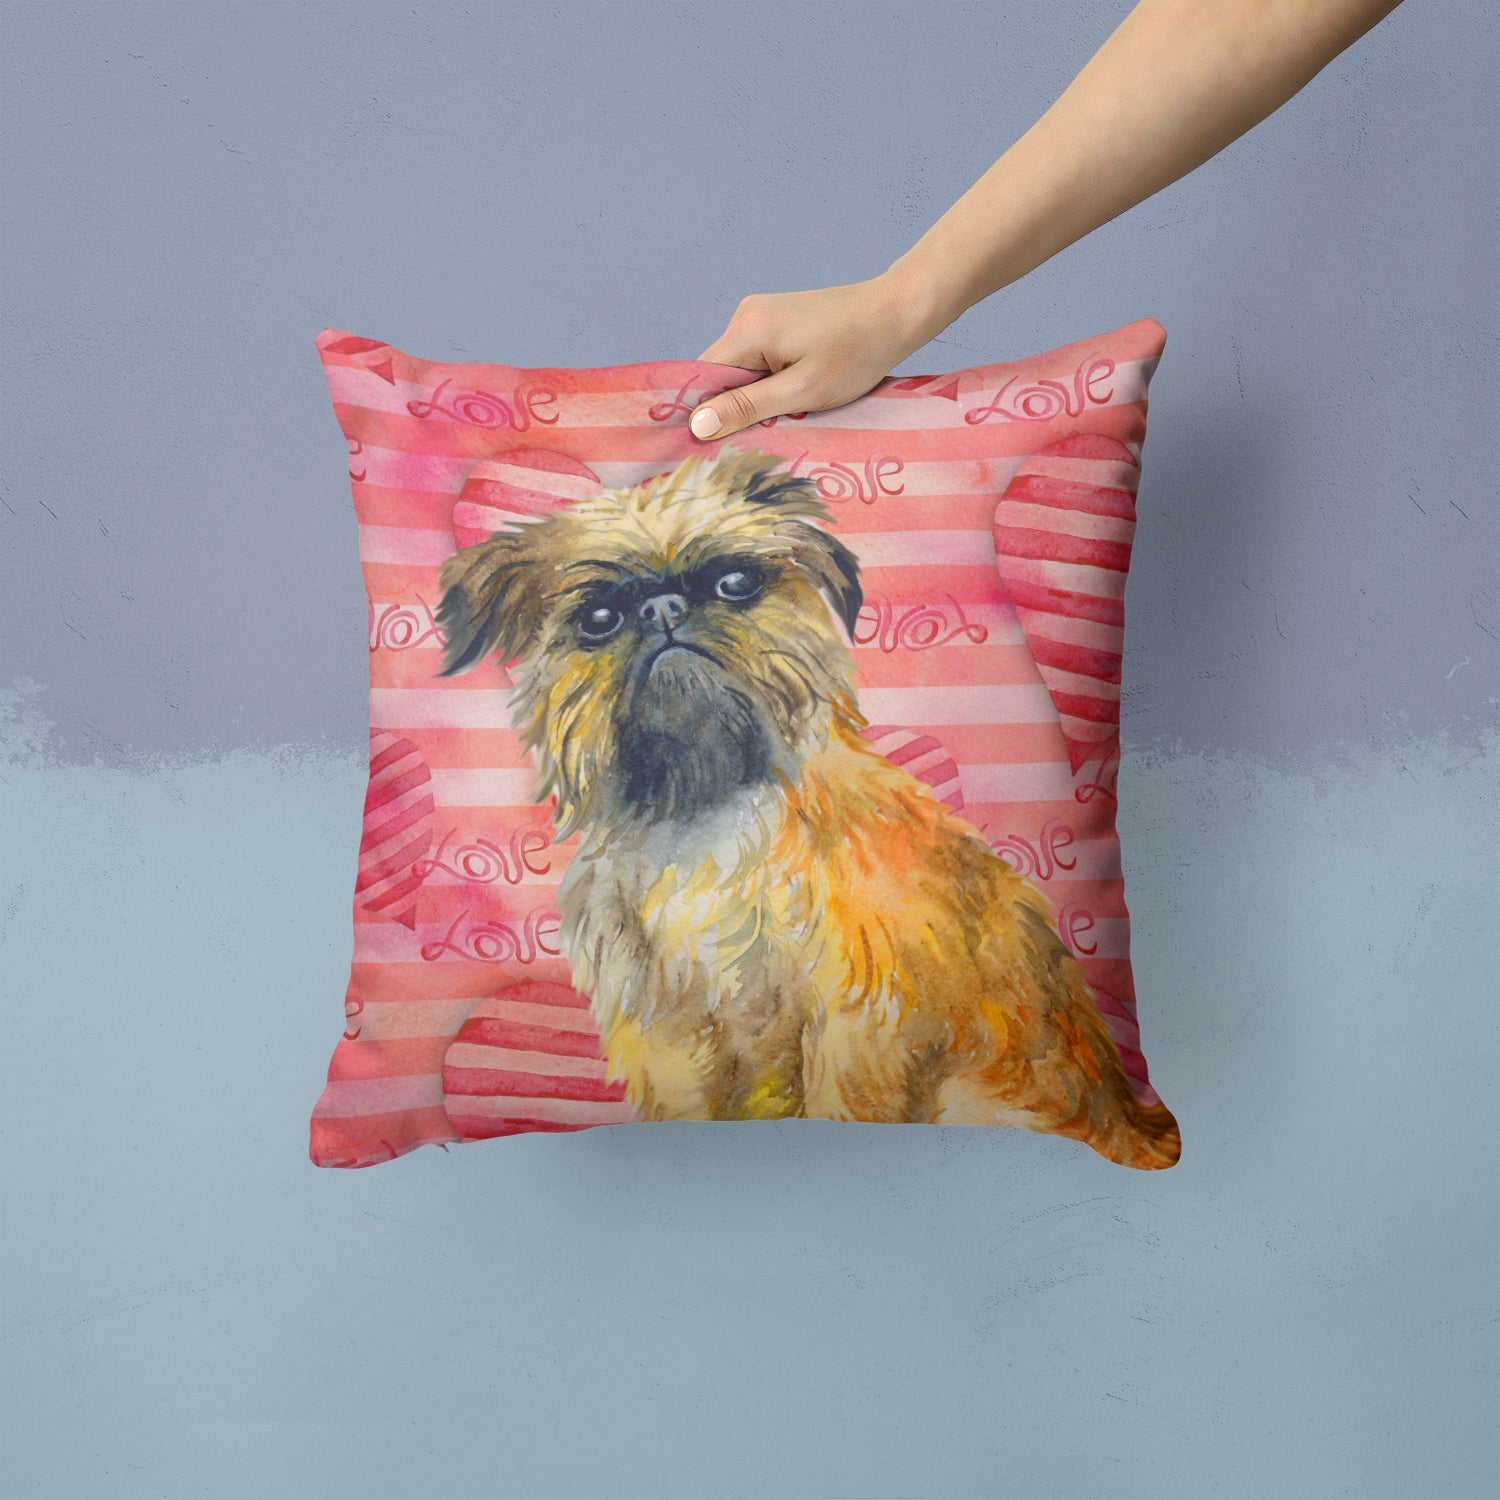 Brussels Griffon Love Fabric Decorative Pillow BB9774PW1414 - the-store.com